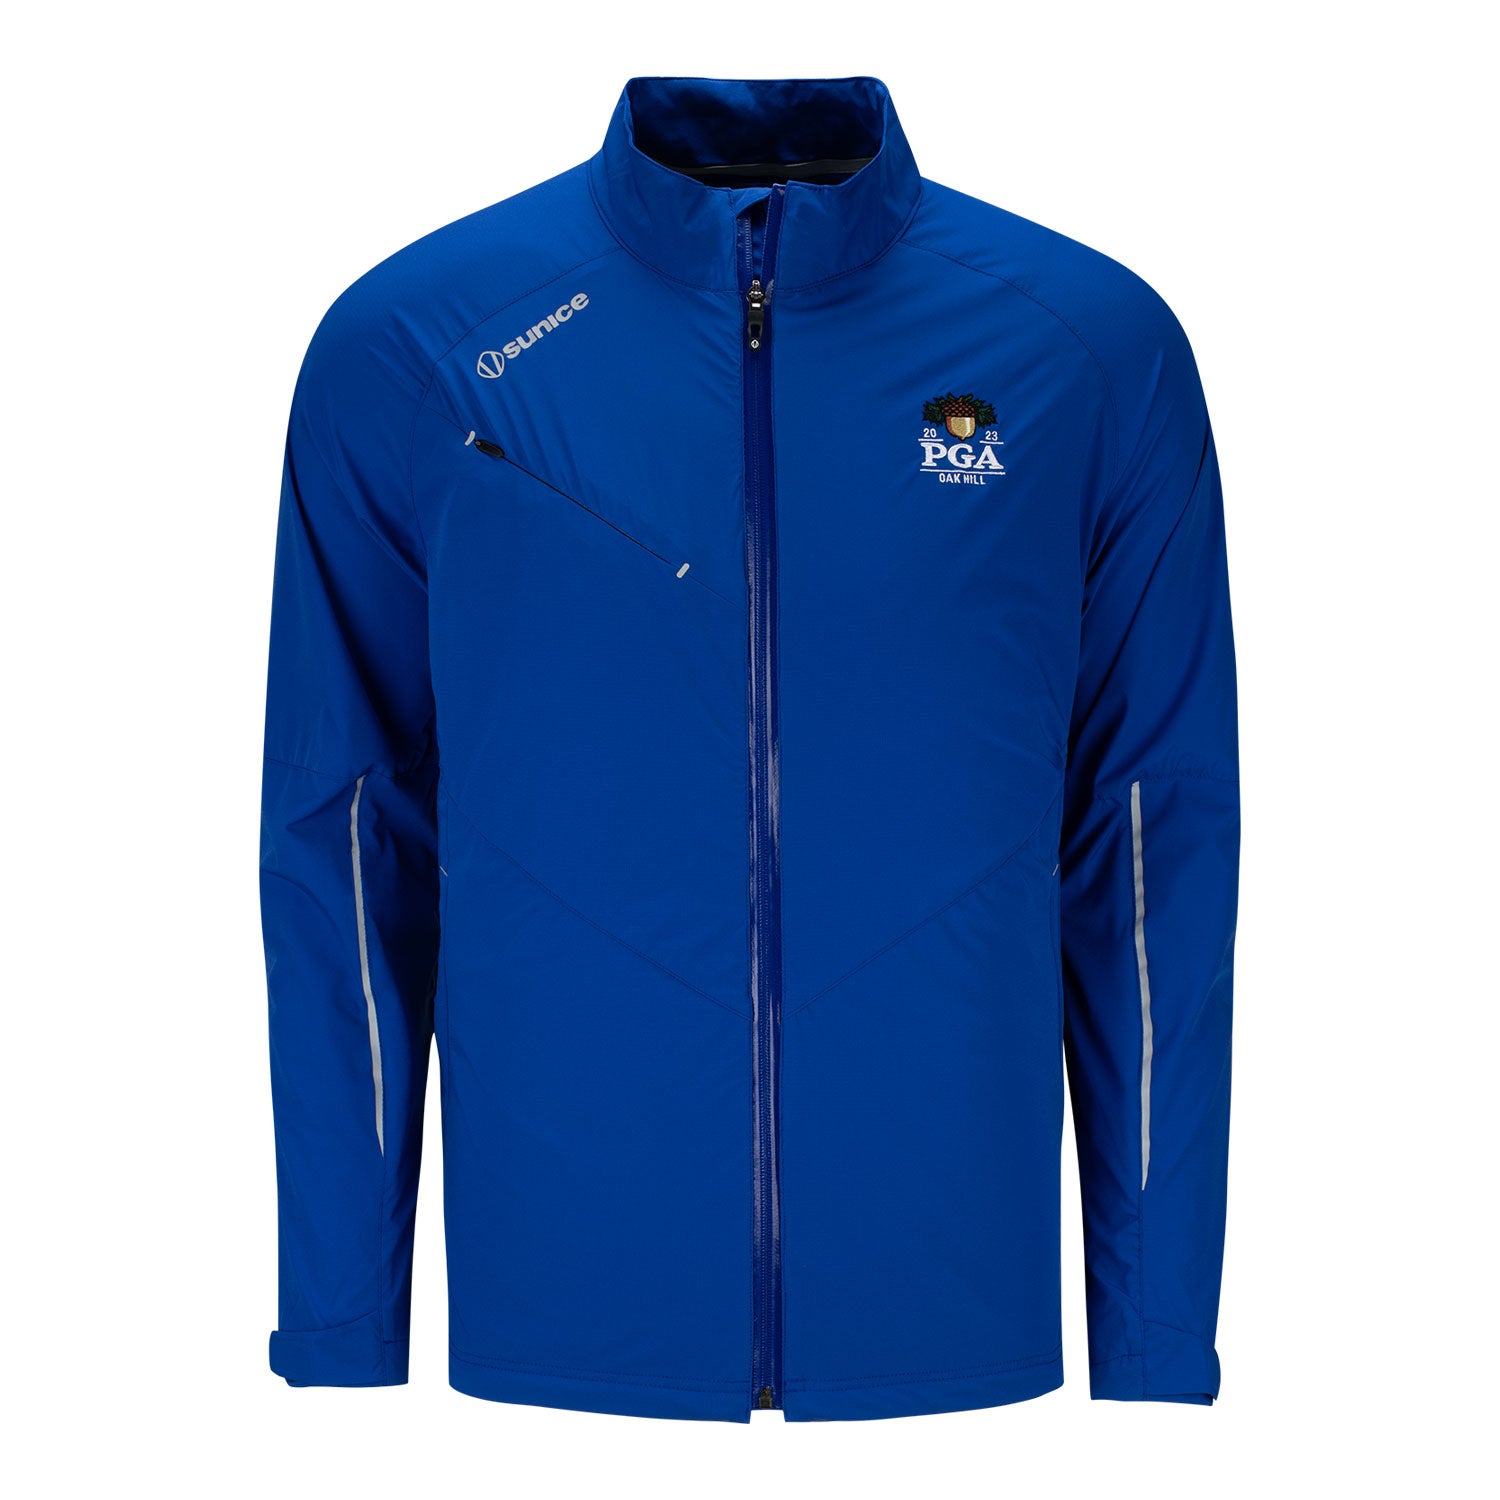 Sunice 2023 PGA Championship Elliot Wind Jacket in Blue- Front View